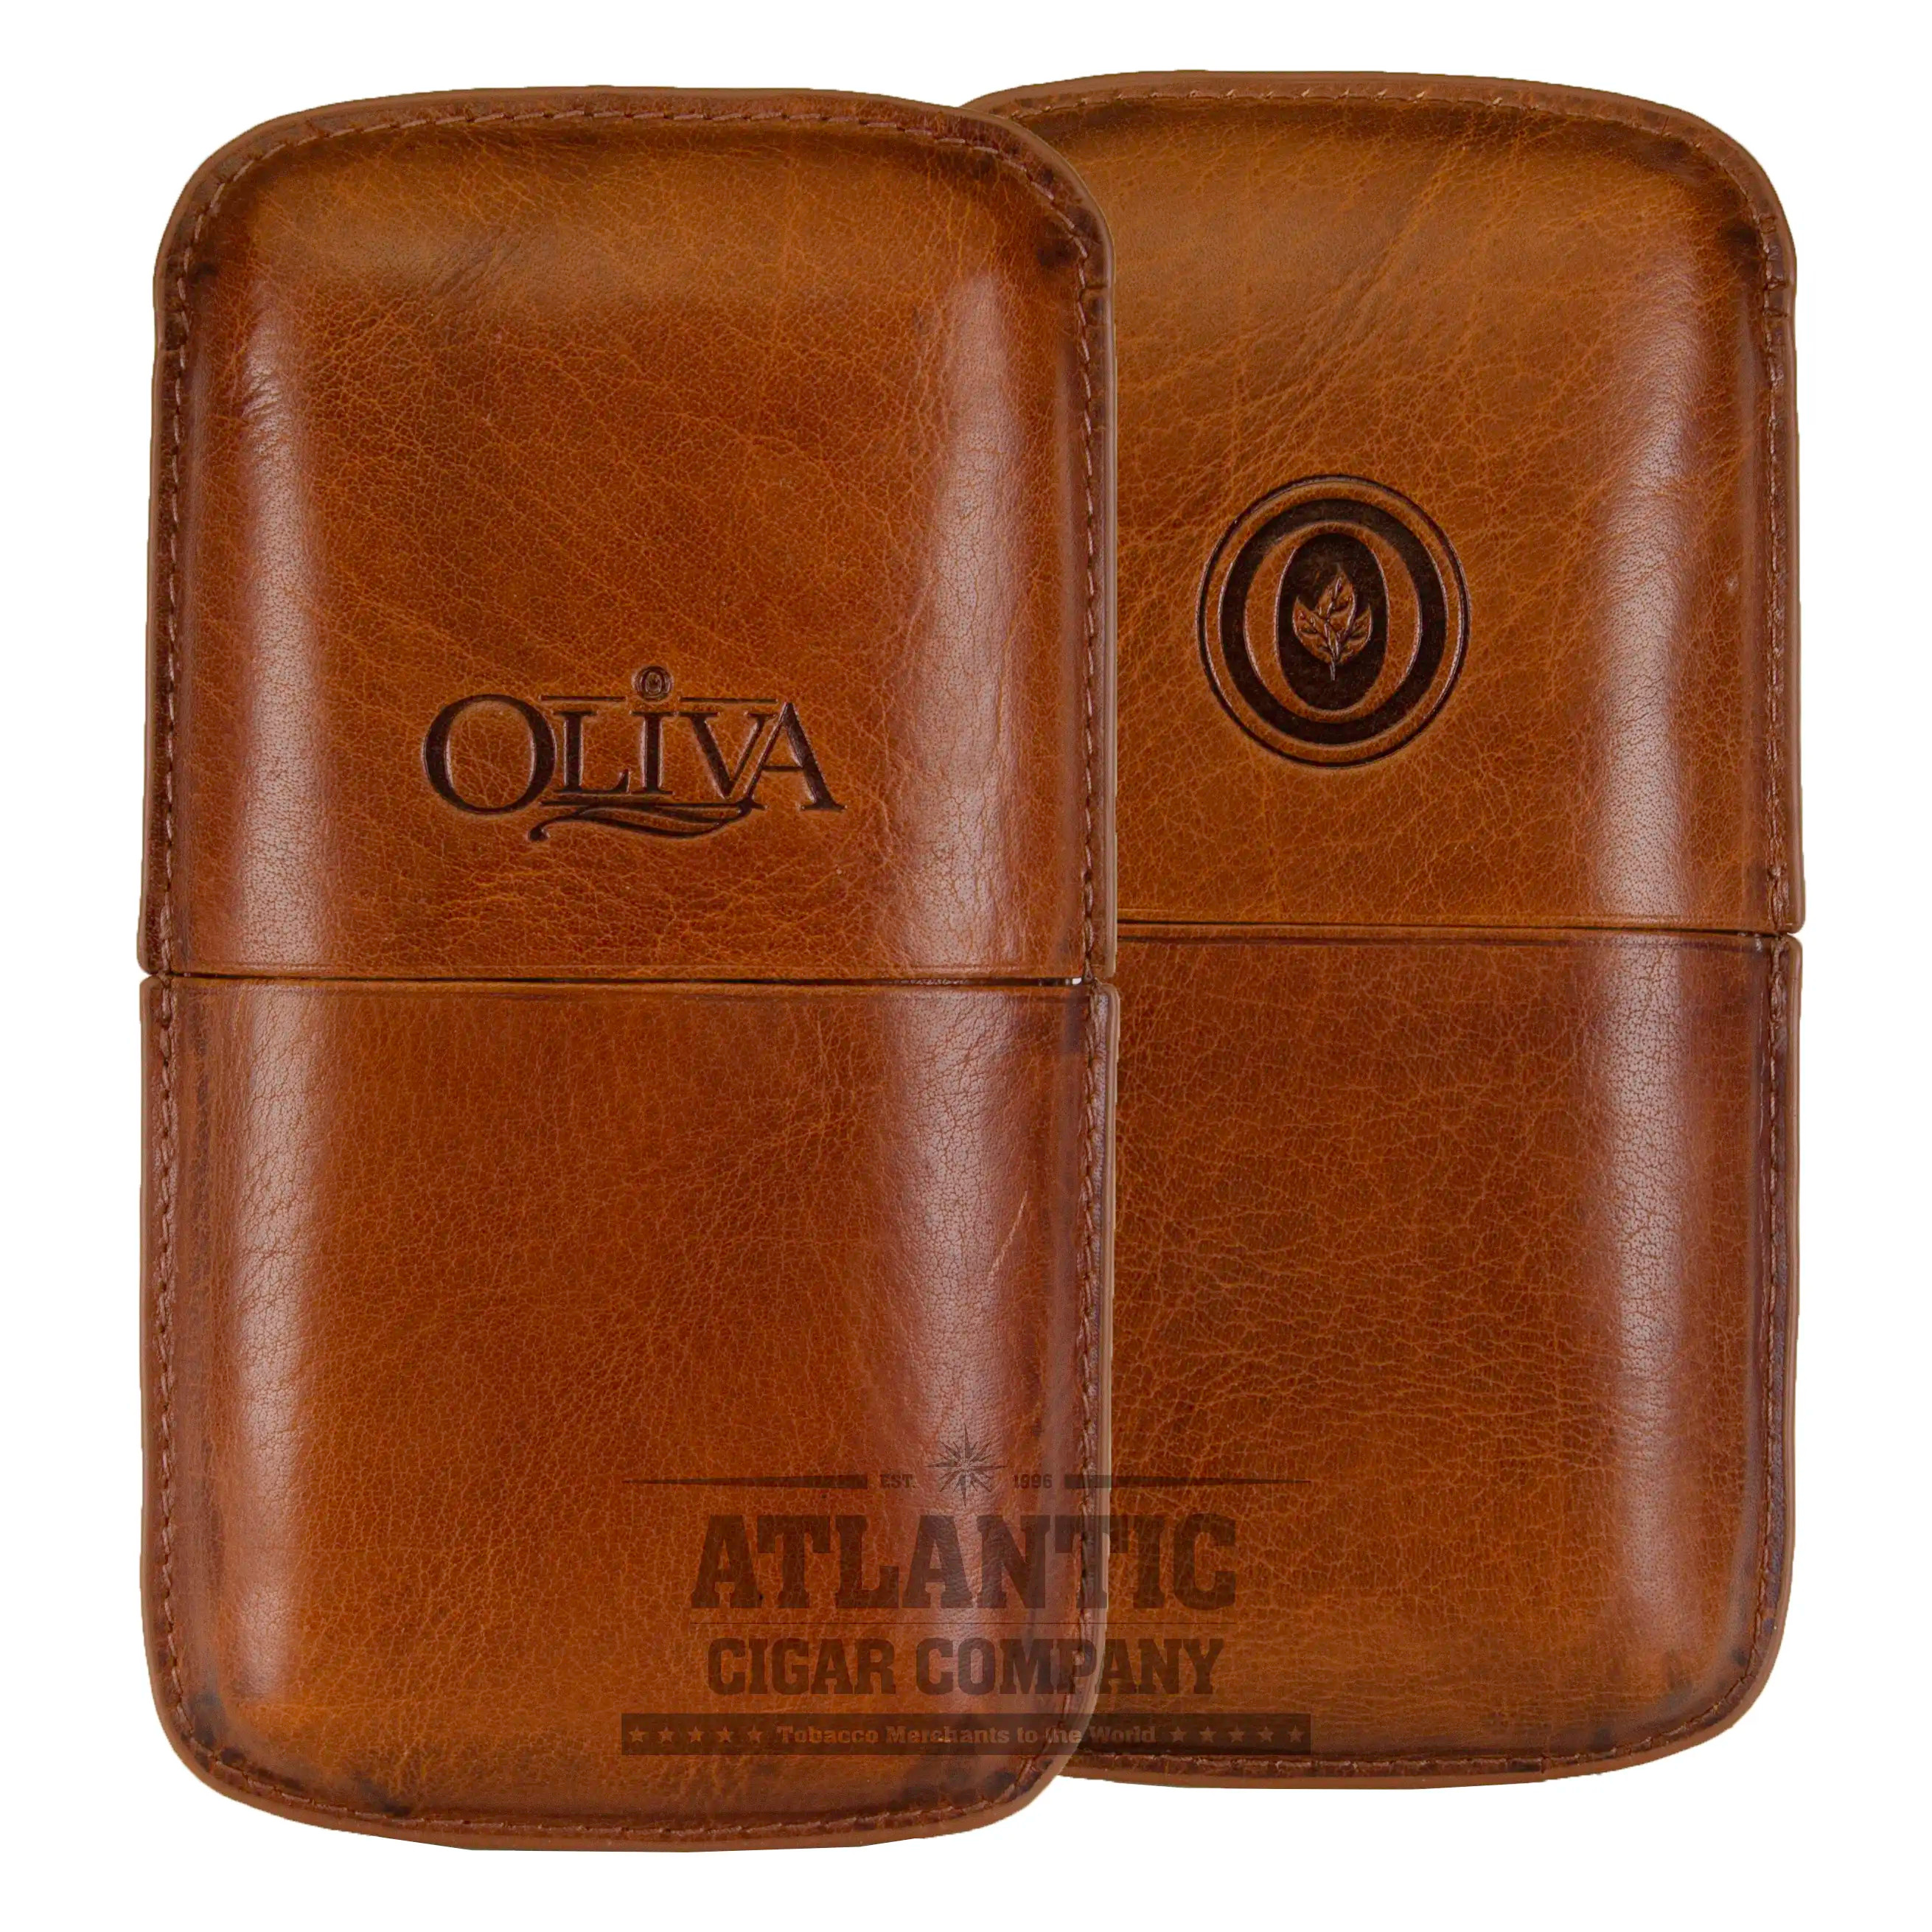 Oliva Limited Edition 3-Cigar Leather Case (Tan)